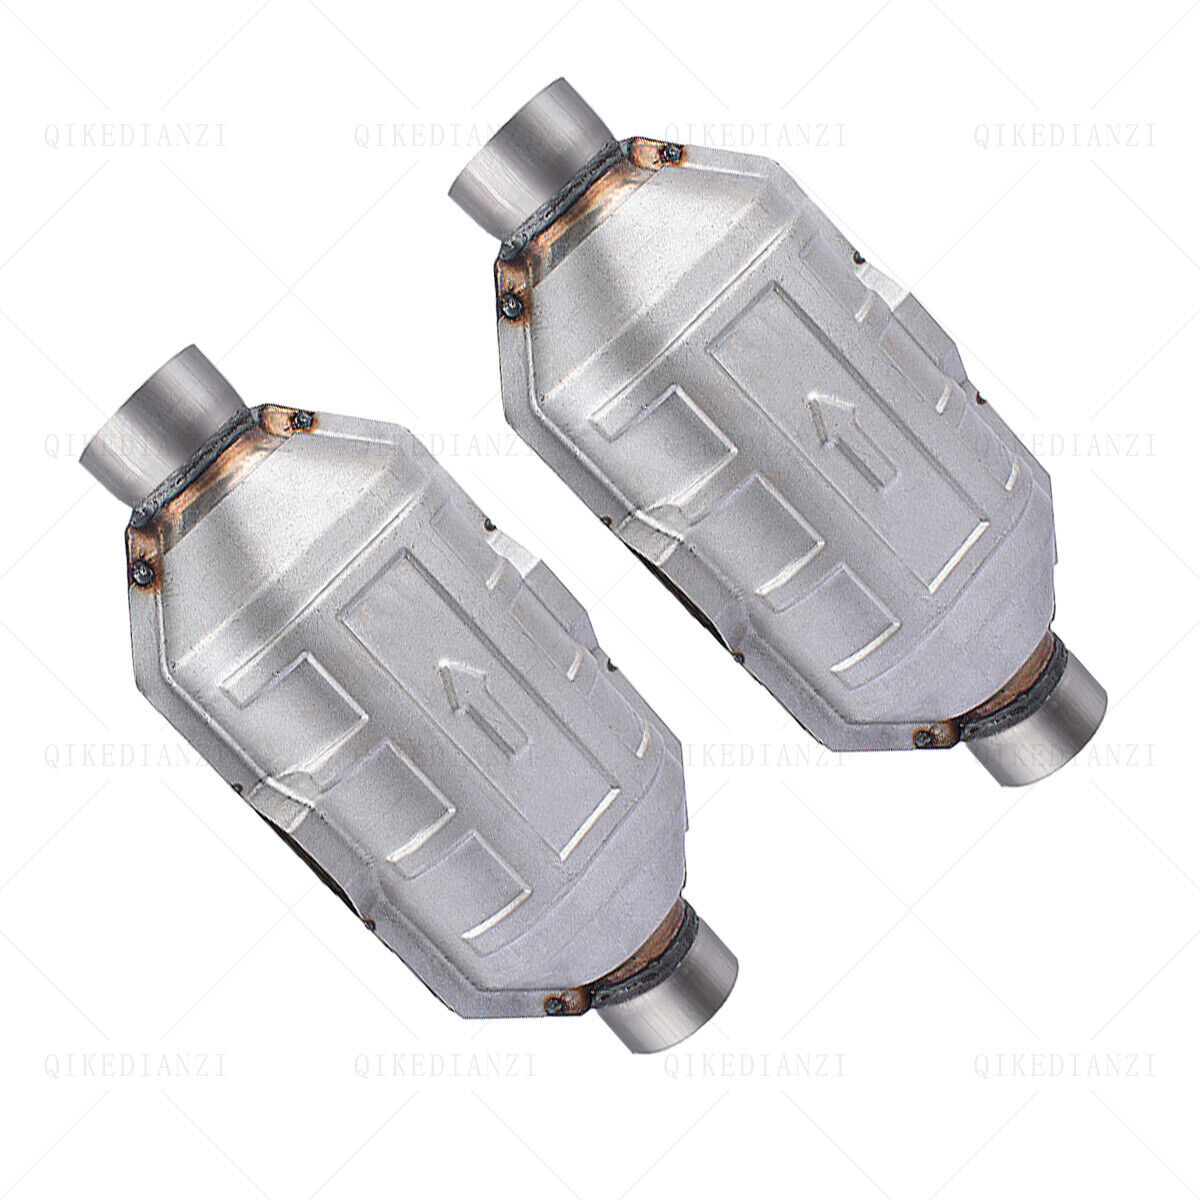 2PCS 2.5 Inch Universal Catalytic Converter High Flow Stainless Steel 83166